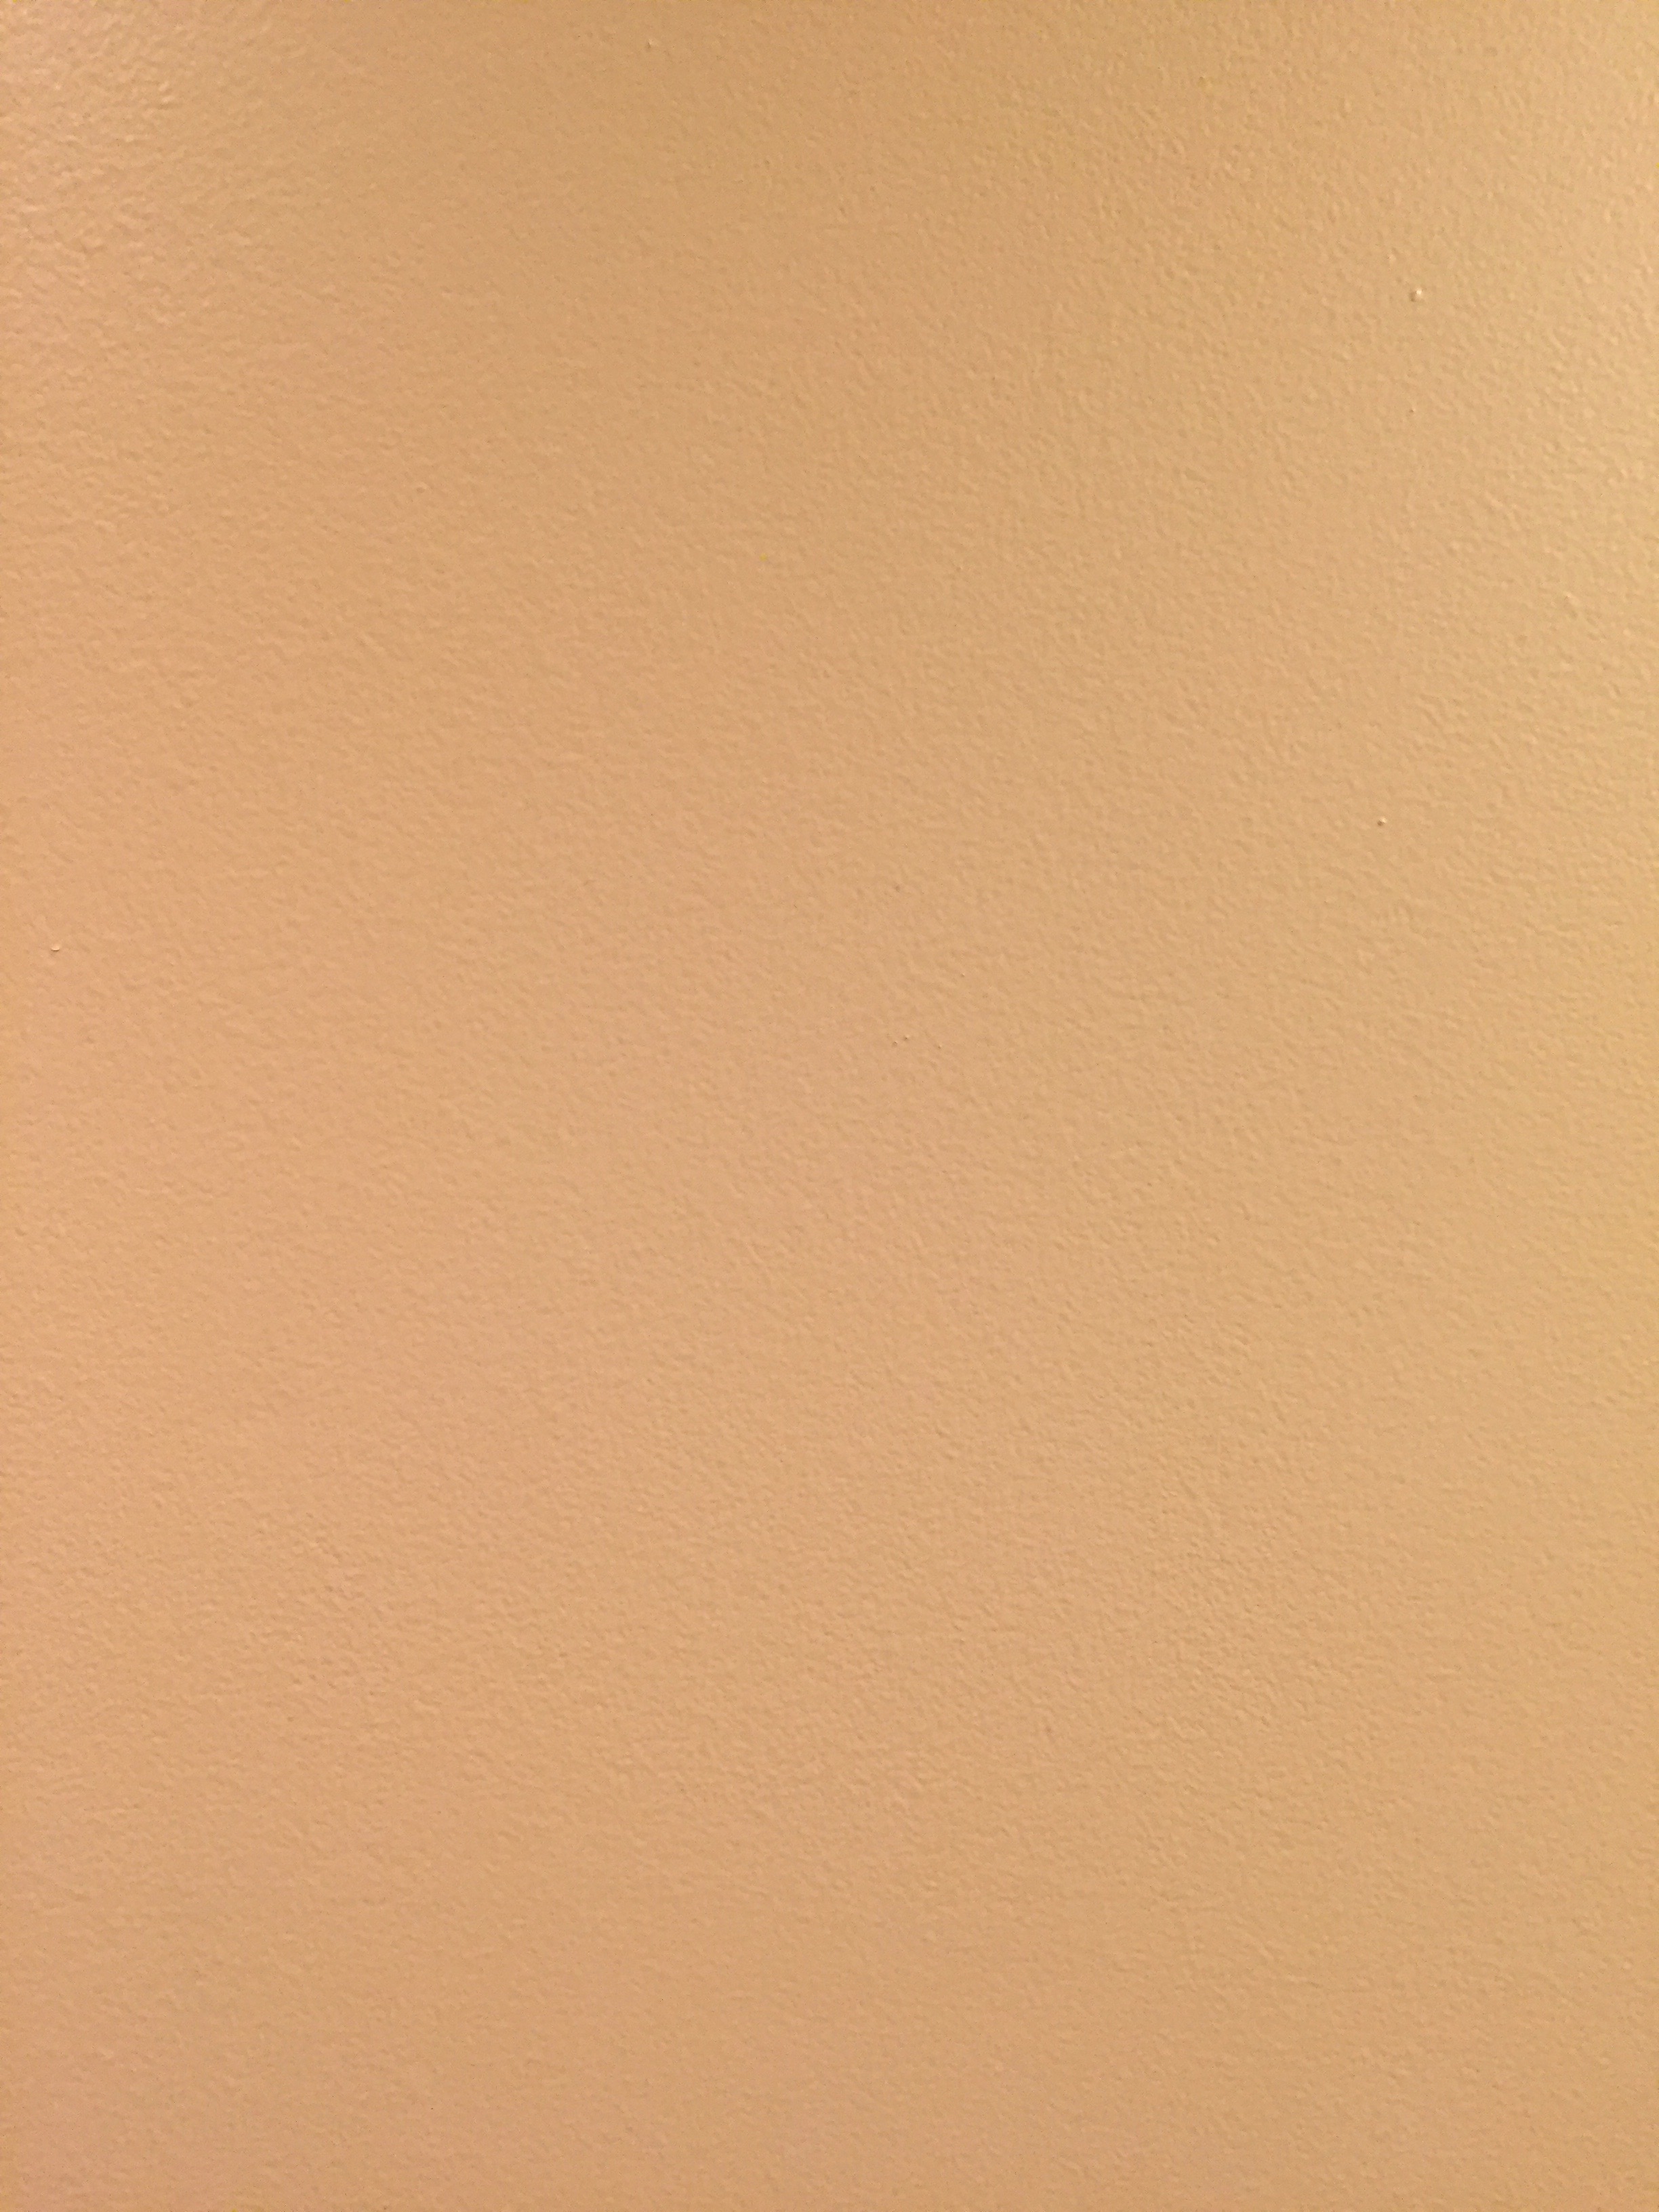 Subtle paint texture on a flat tan wall 